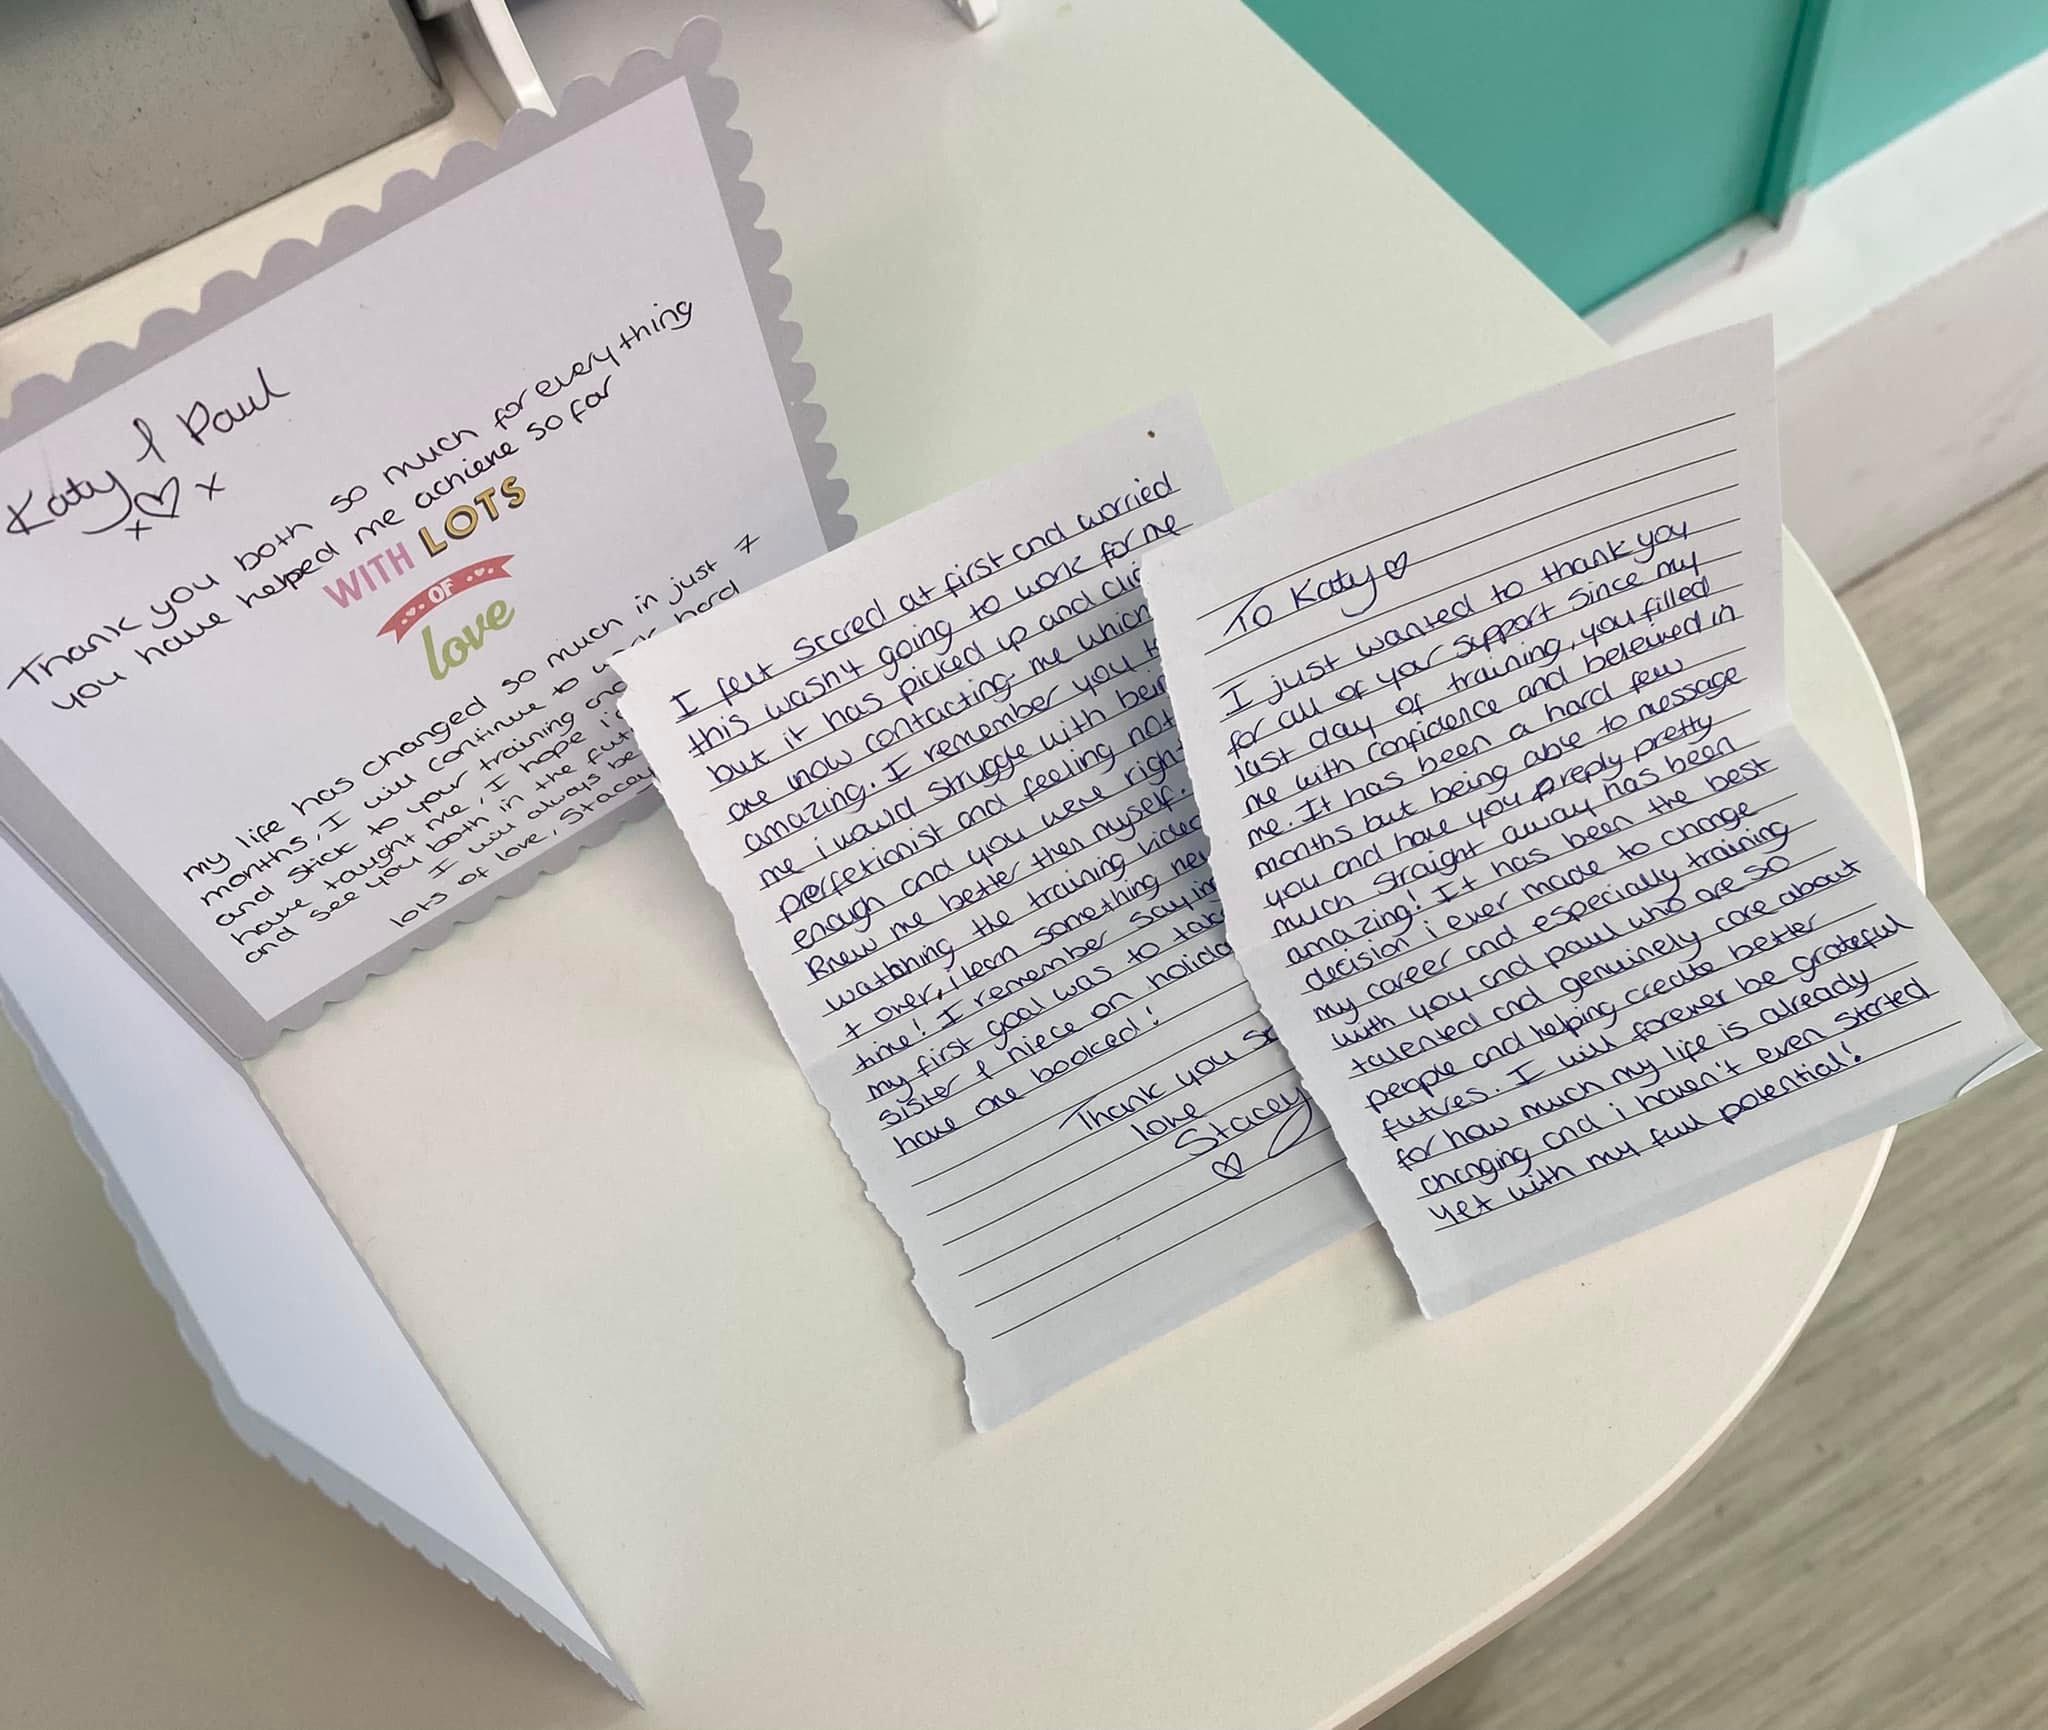 Stacey wrote a lovely thank you letter and card to Katy